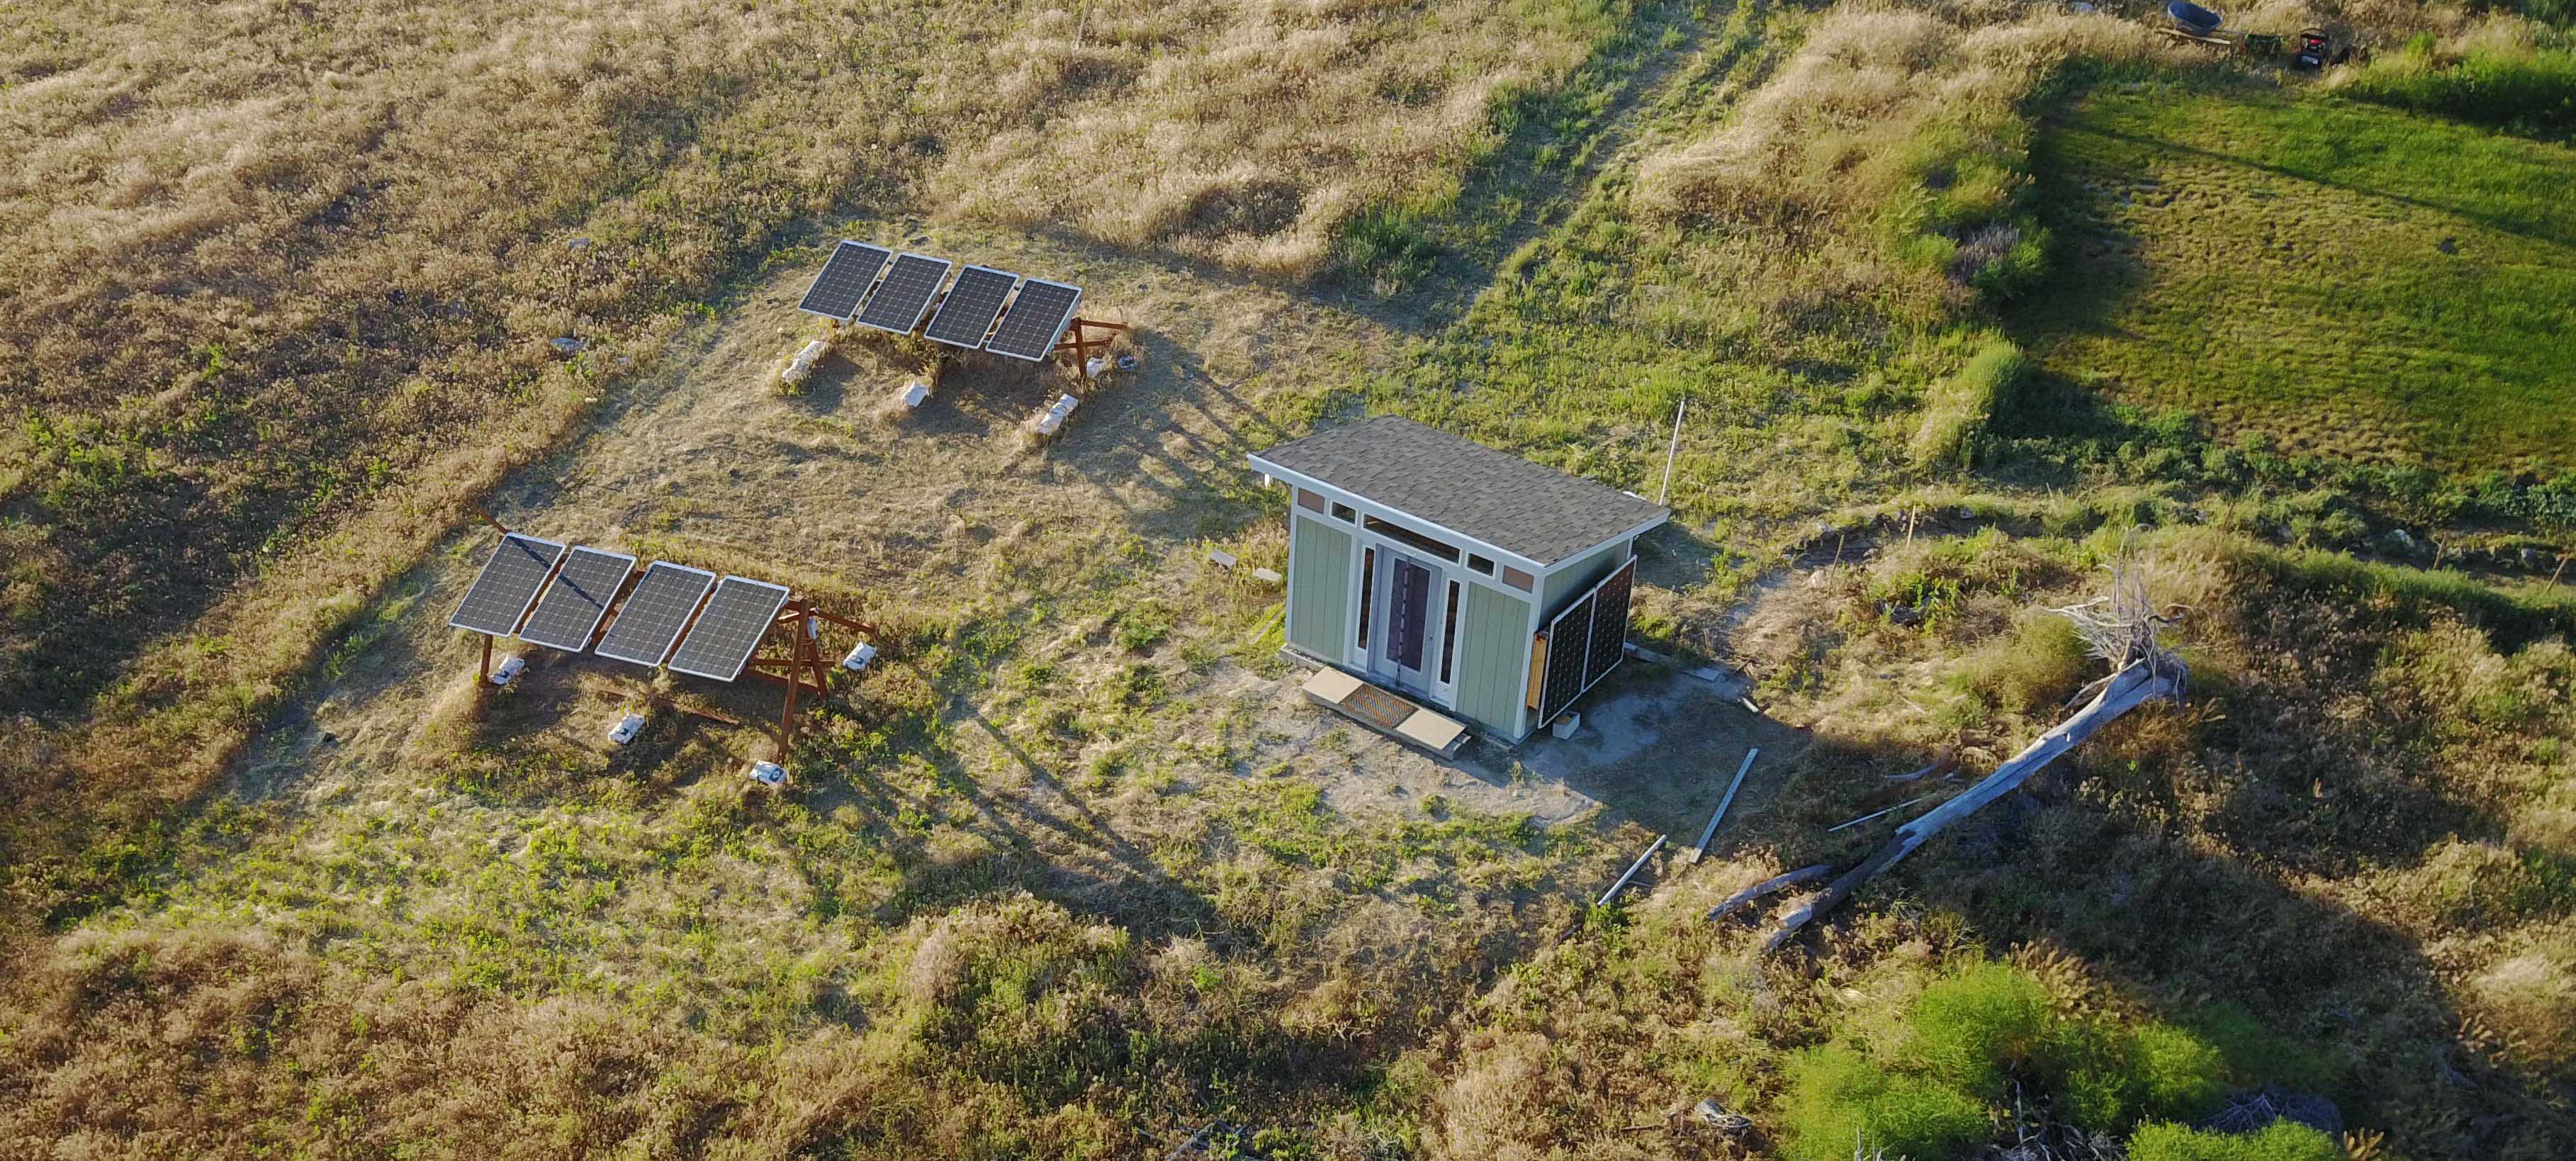 Transform a Tuff Shed into a Solar-Powered Workspace